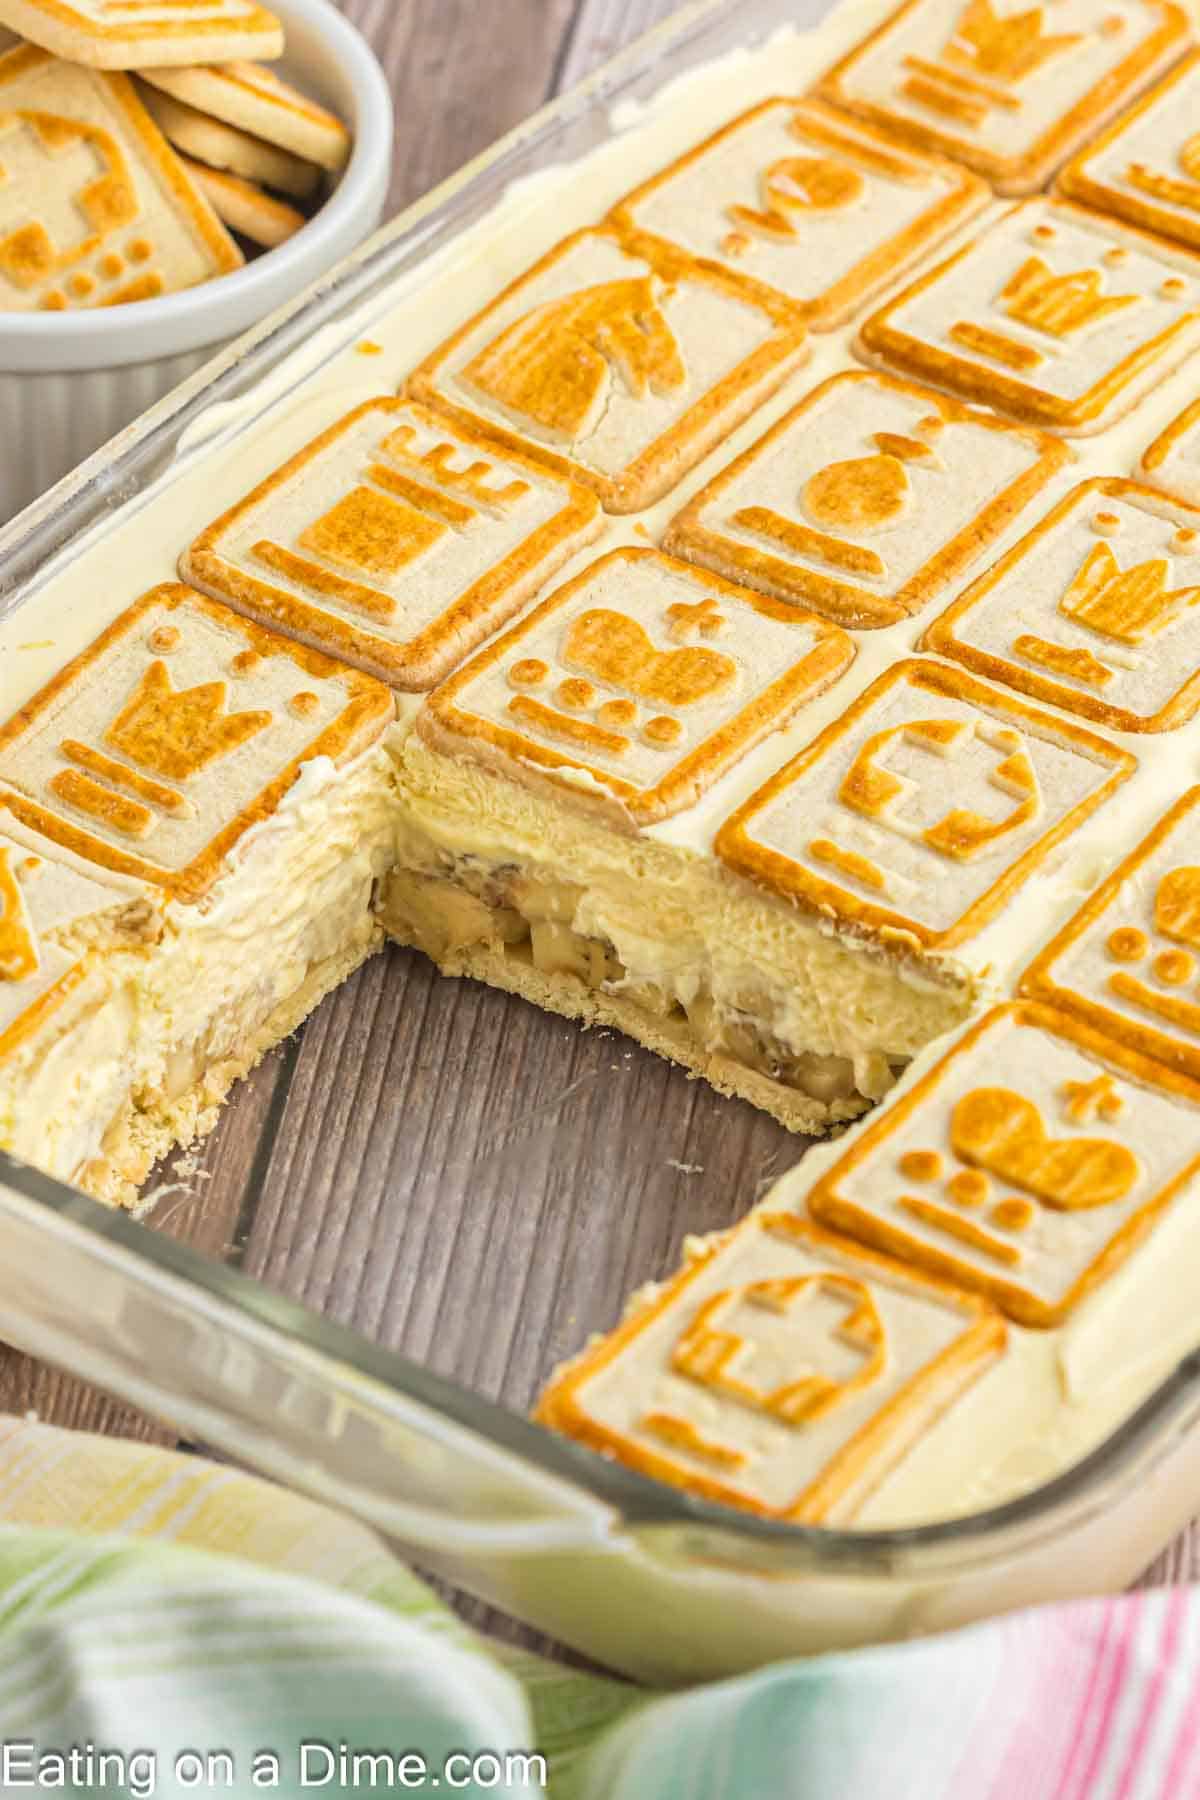 Close up image of banana pudding in the baking dish with a slice missing